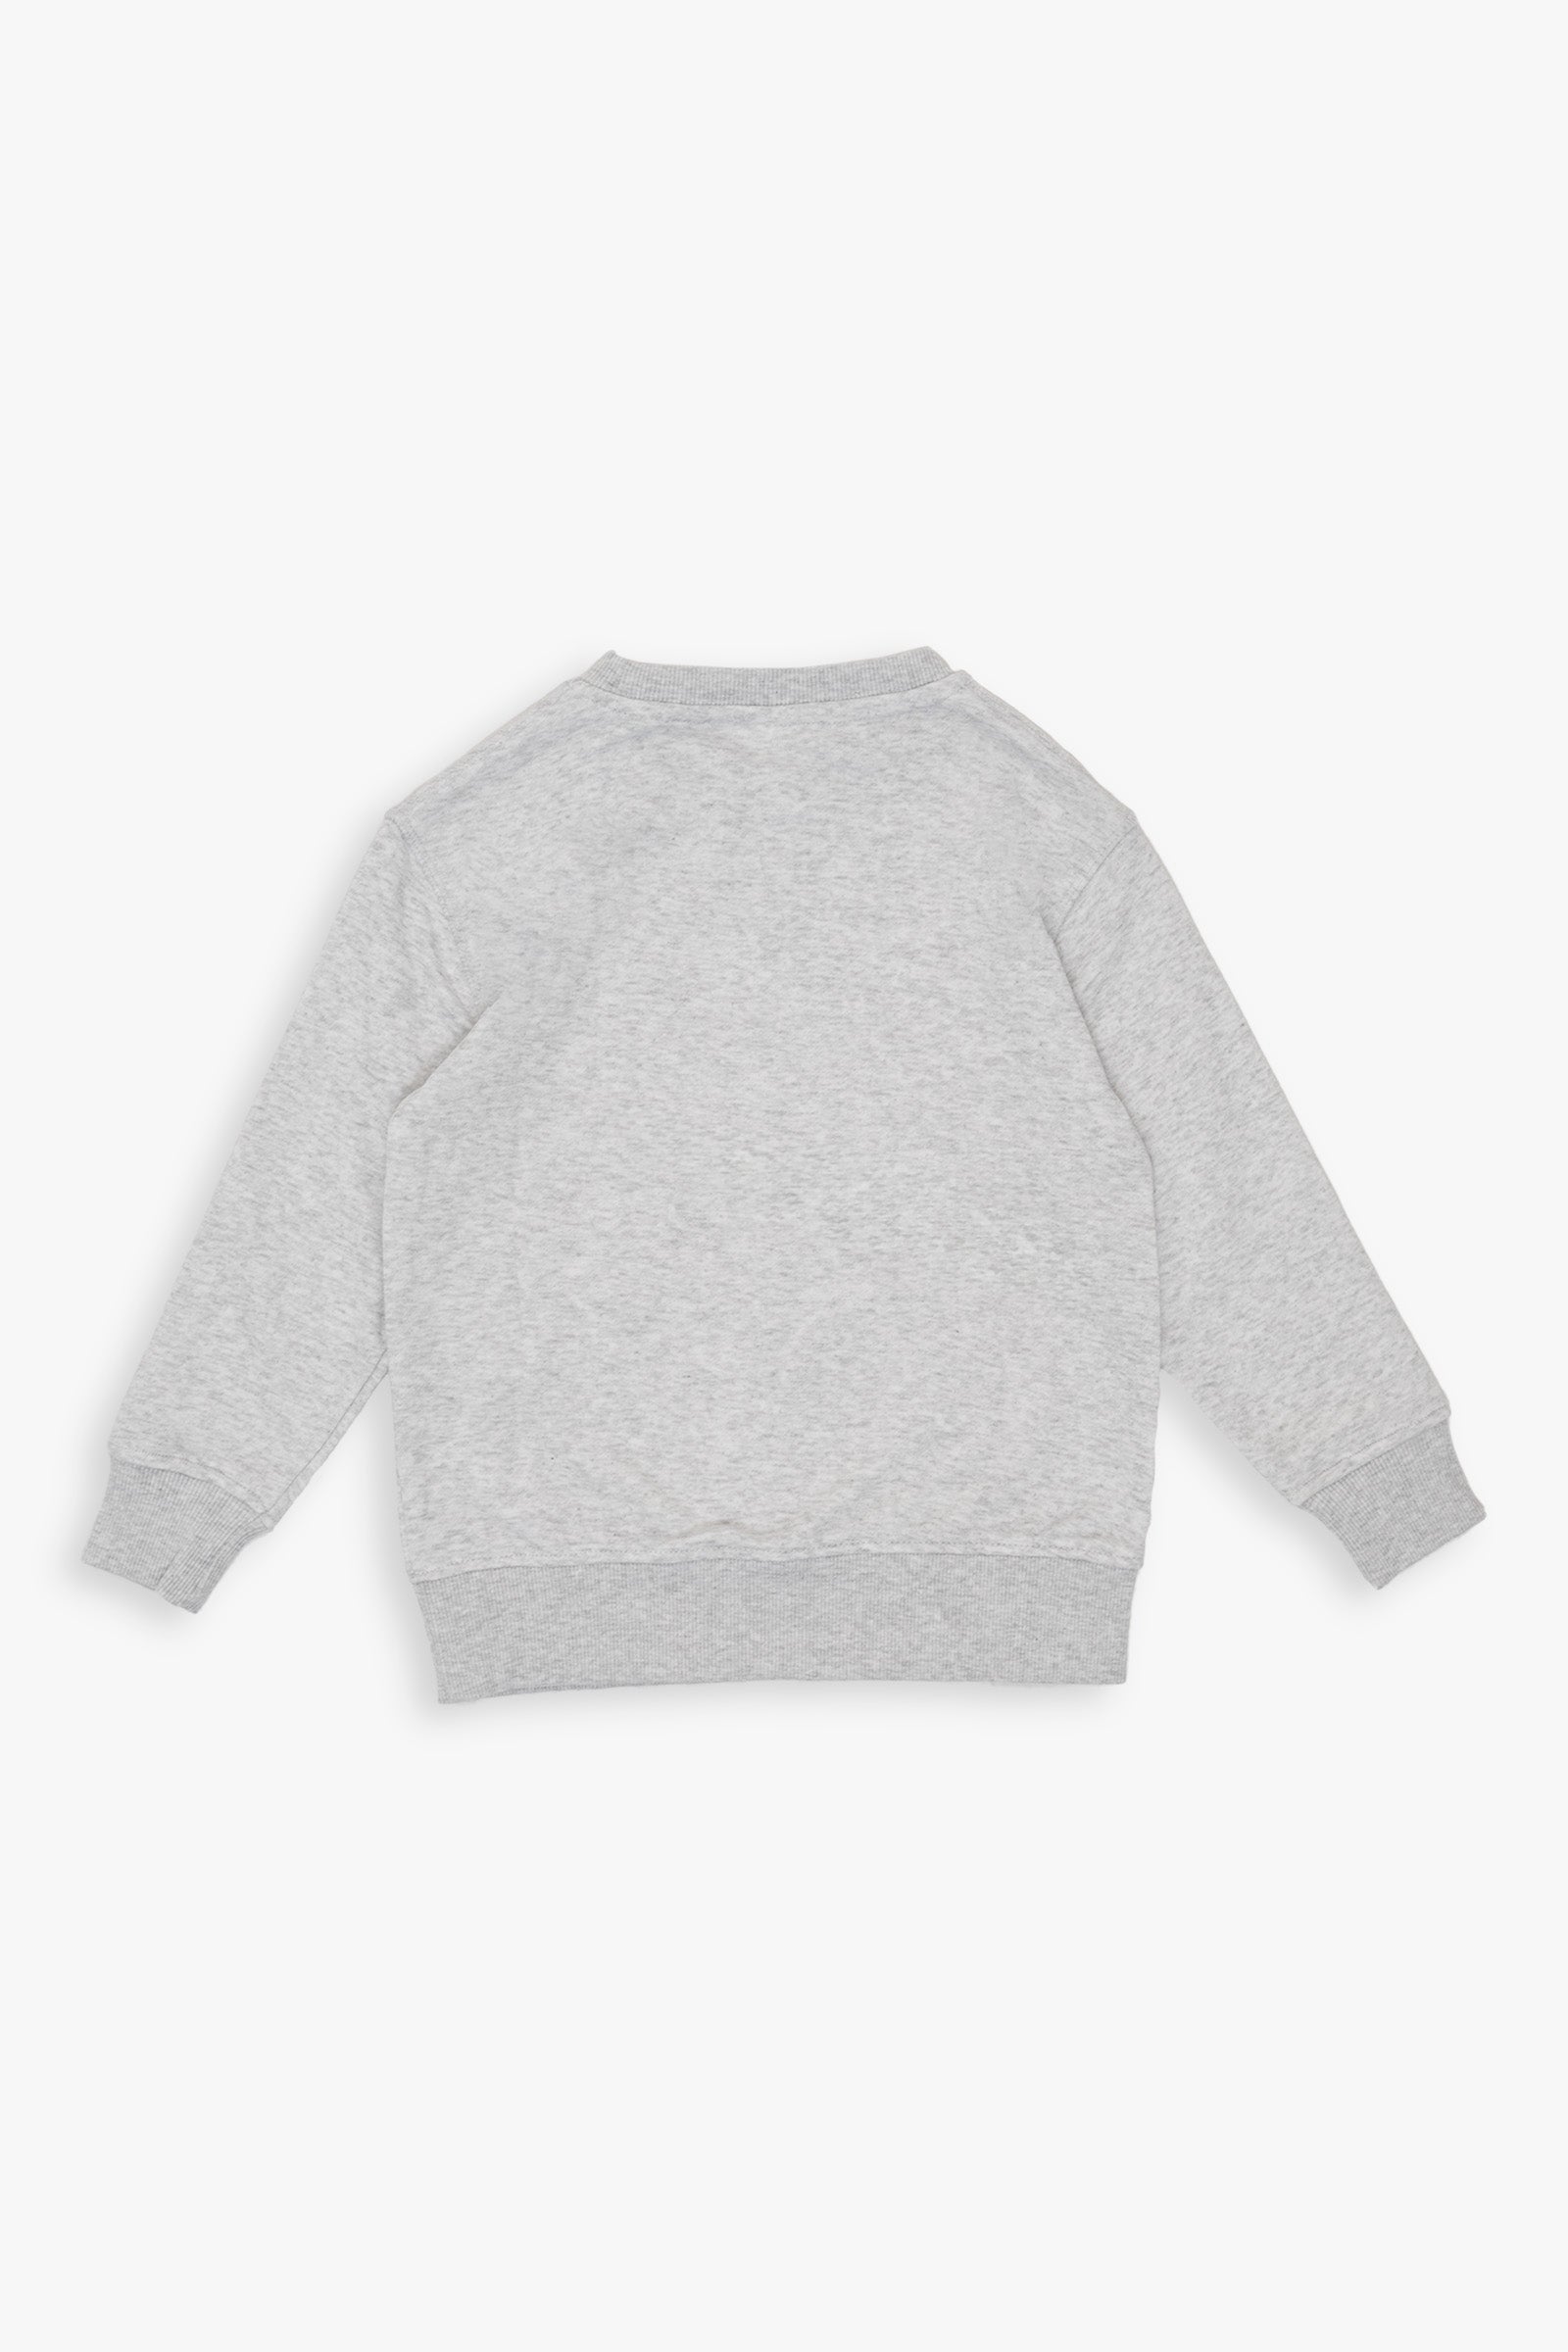 Gertex Youth Kids Unisex French Terry Cotton Crewneck